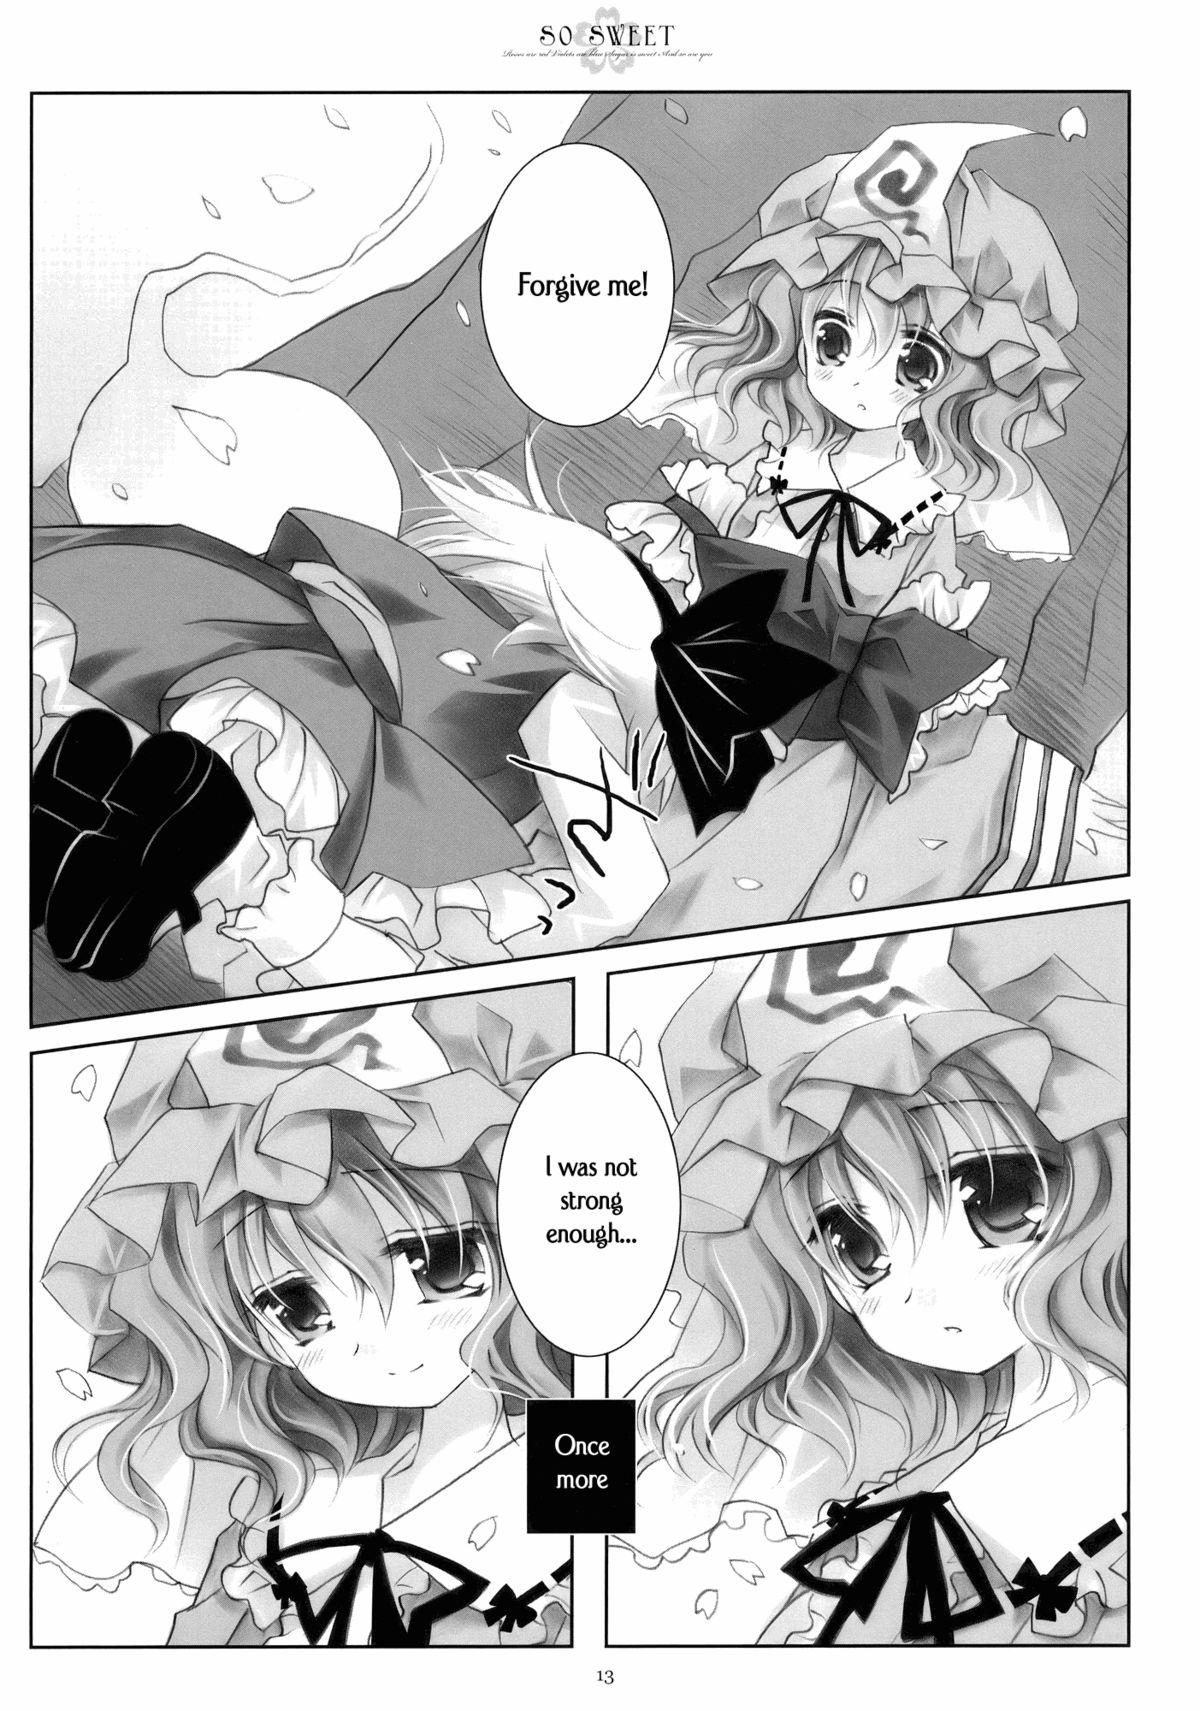 Small Tits SO SWEET - Touhou project Sex Massage - Page 12